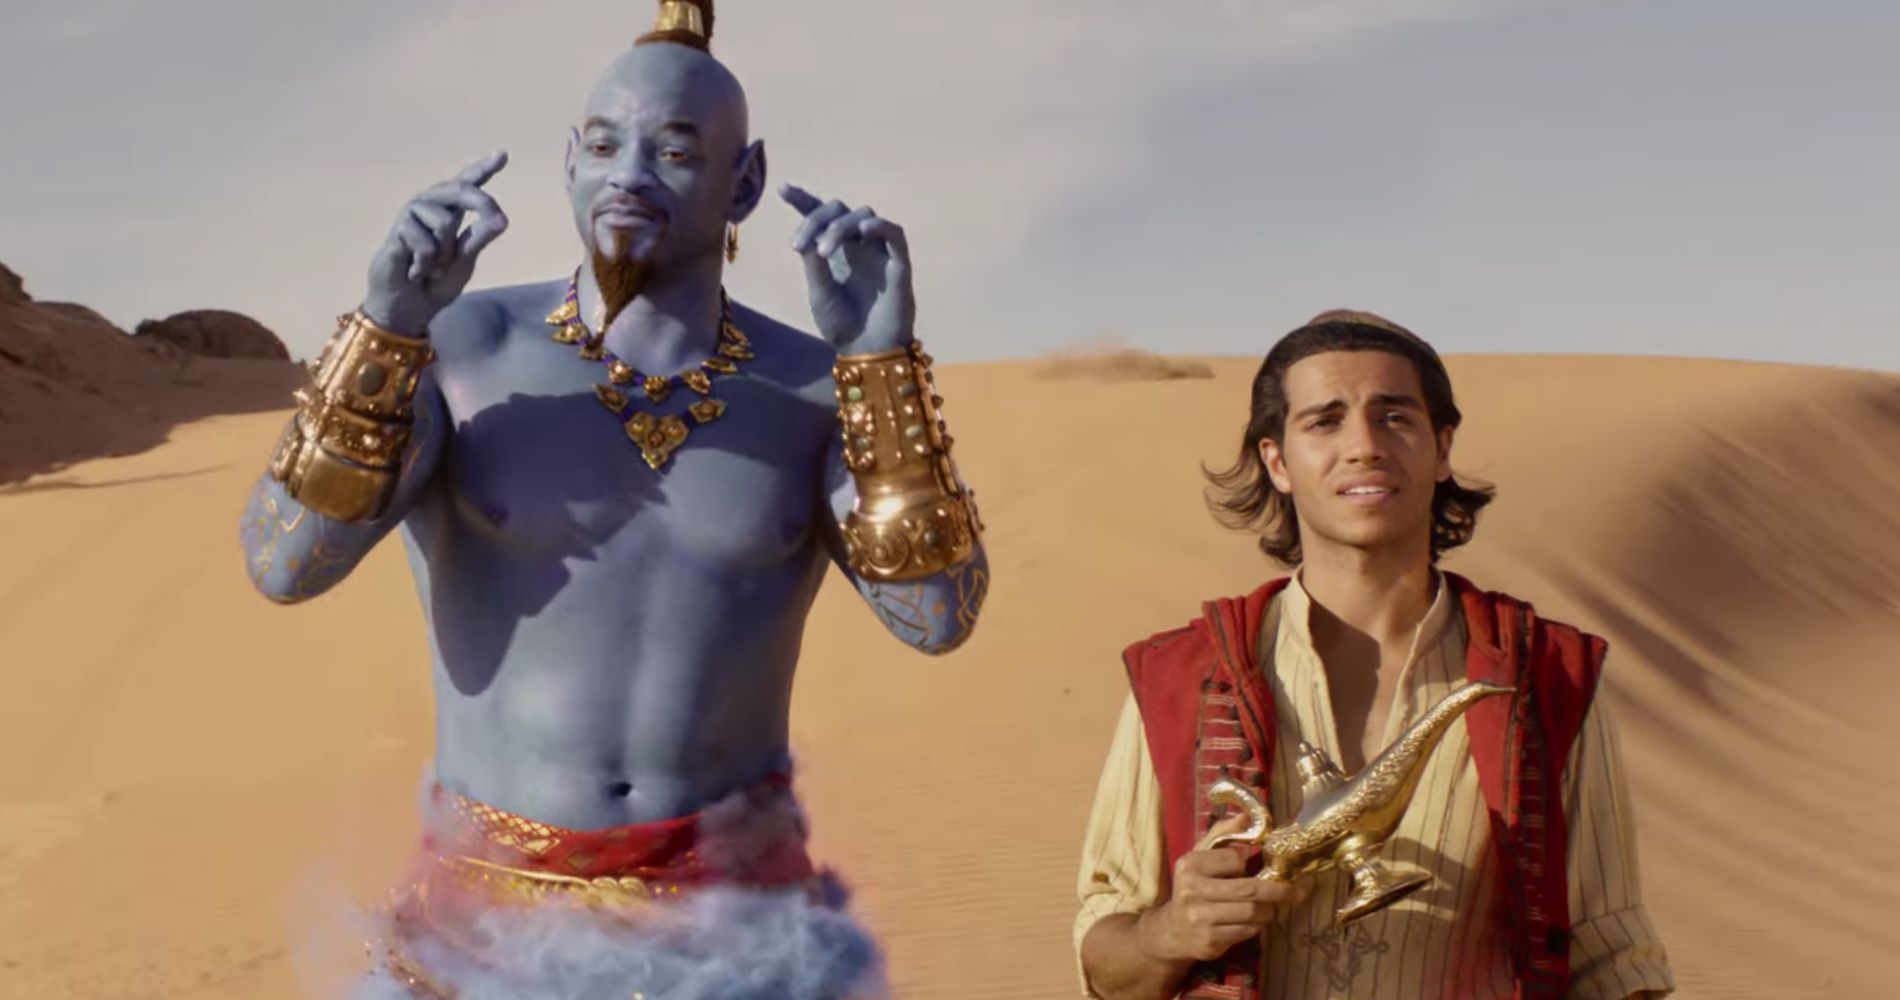 Aladdin Just Beat Independence Day as Will Smith's Highest Grossing Movie Ever